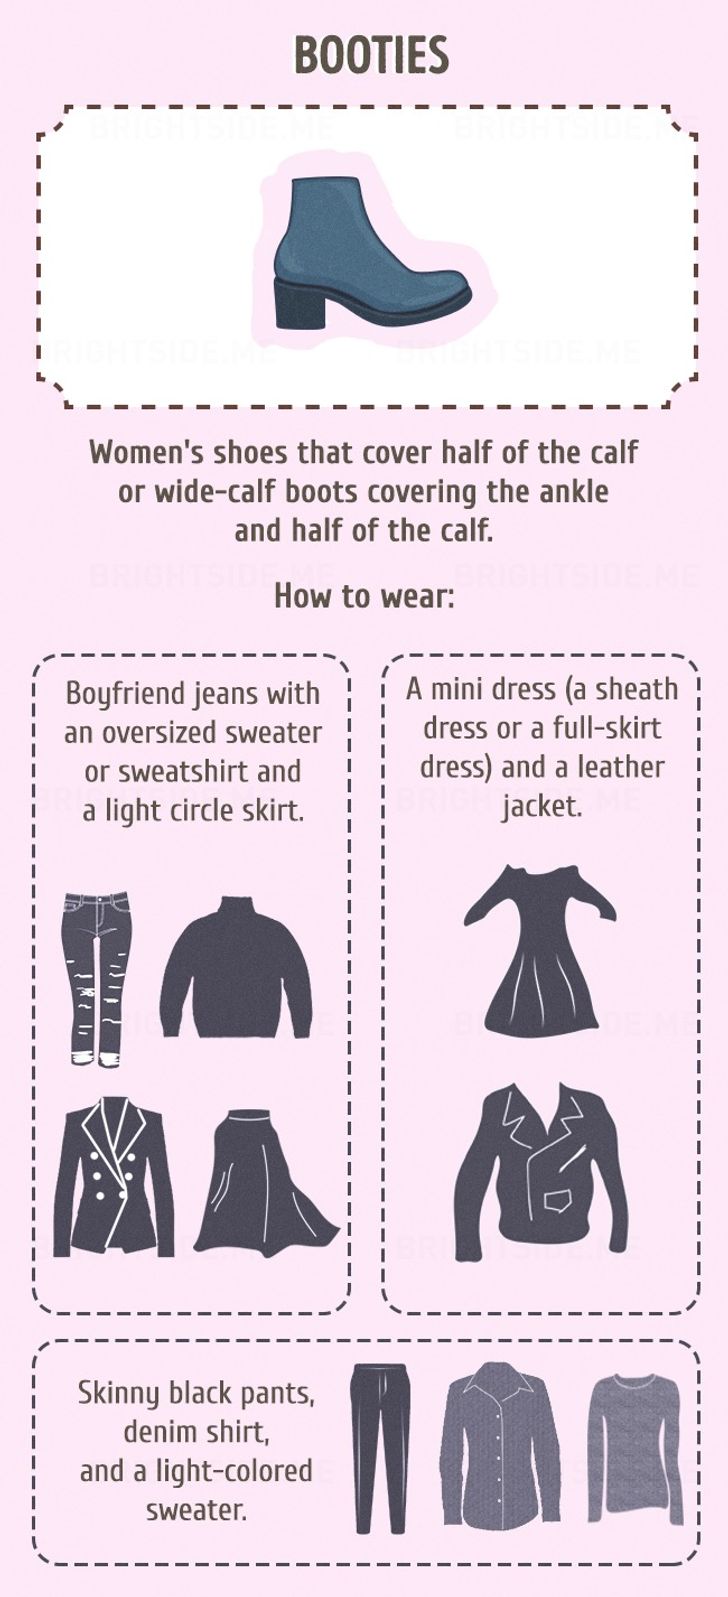 An amazing style guide to women’s shoes